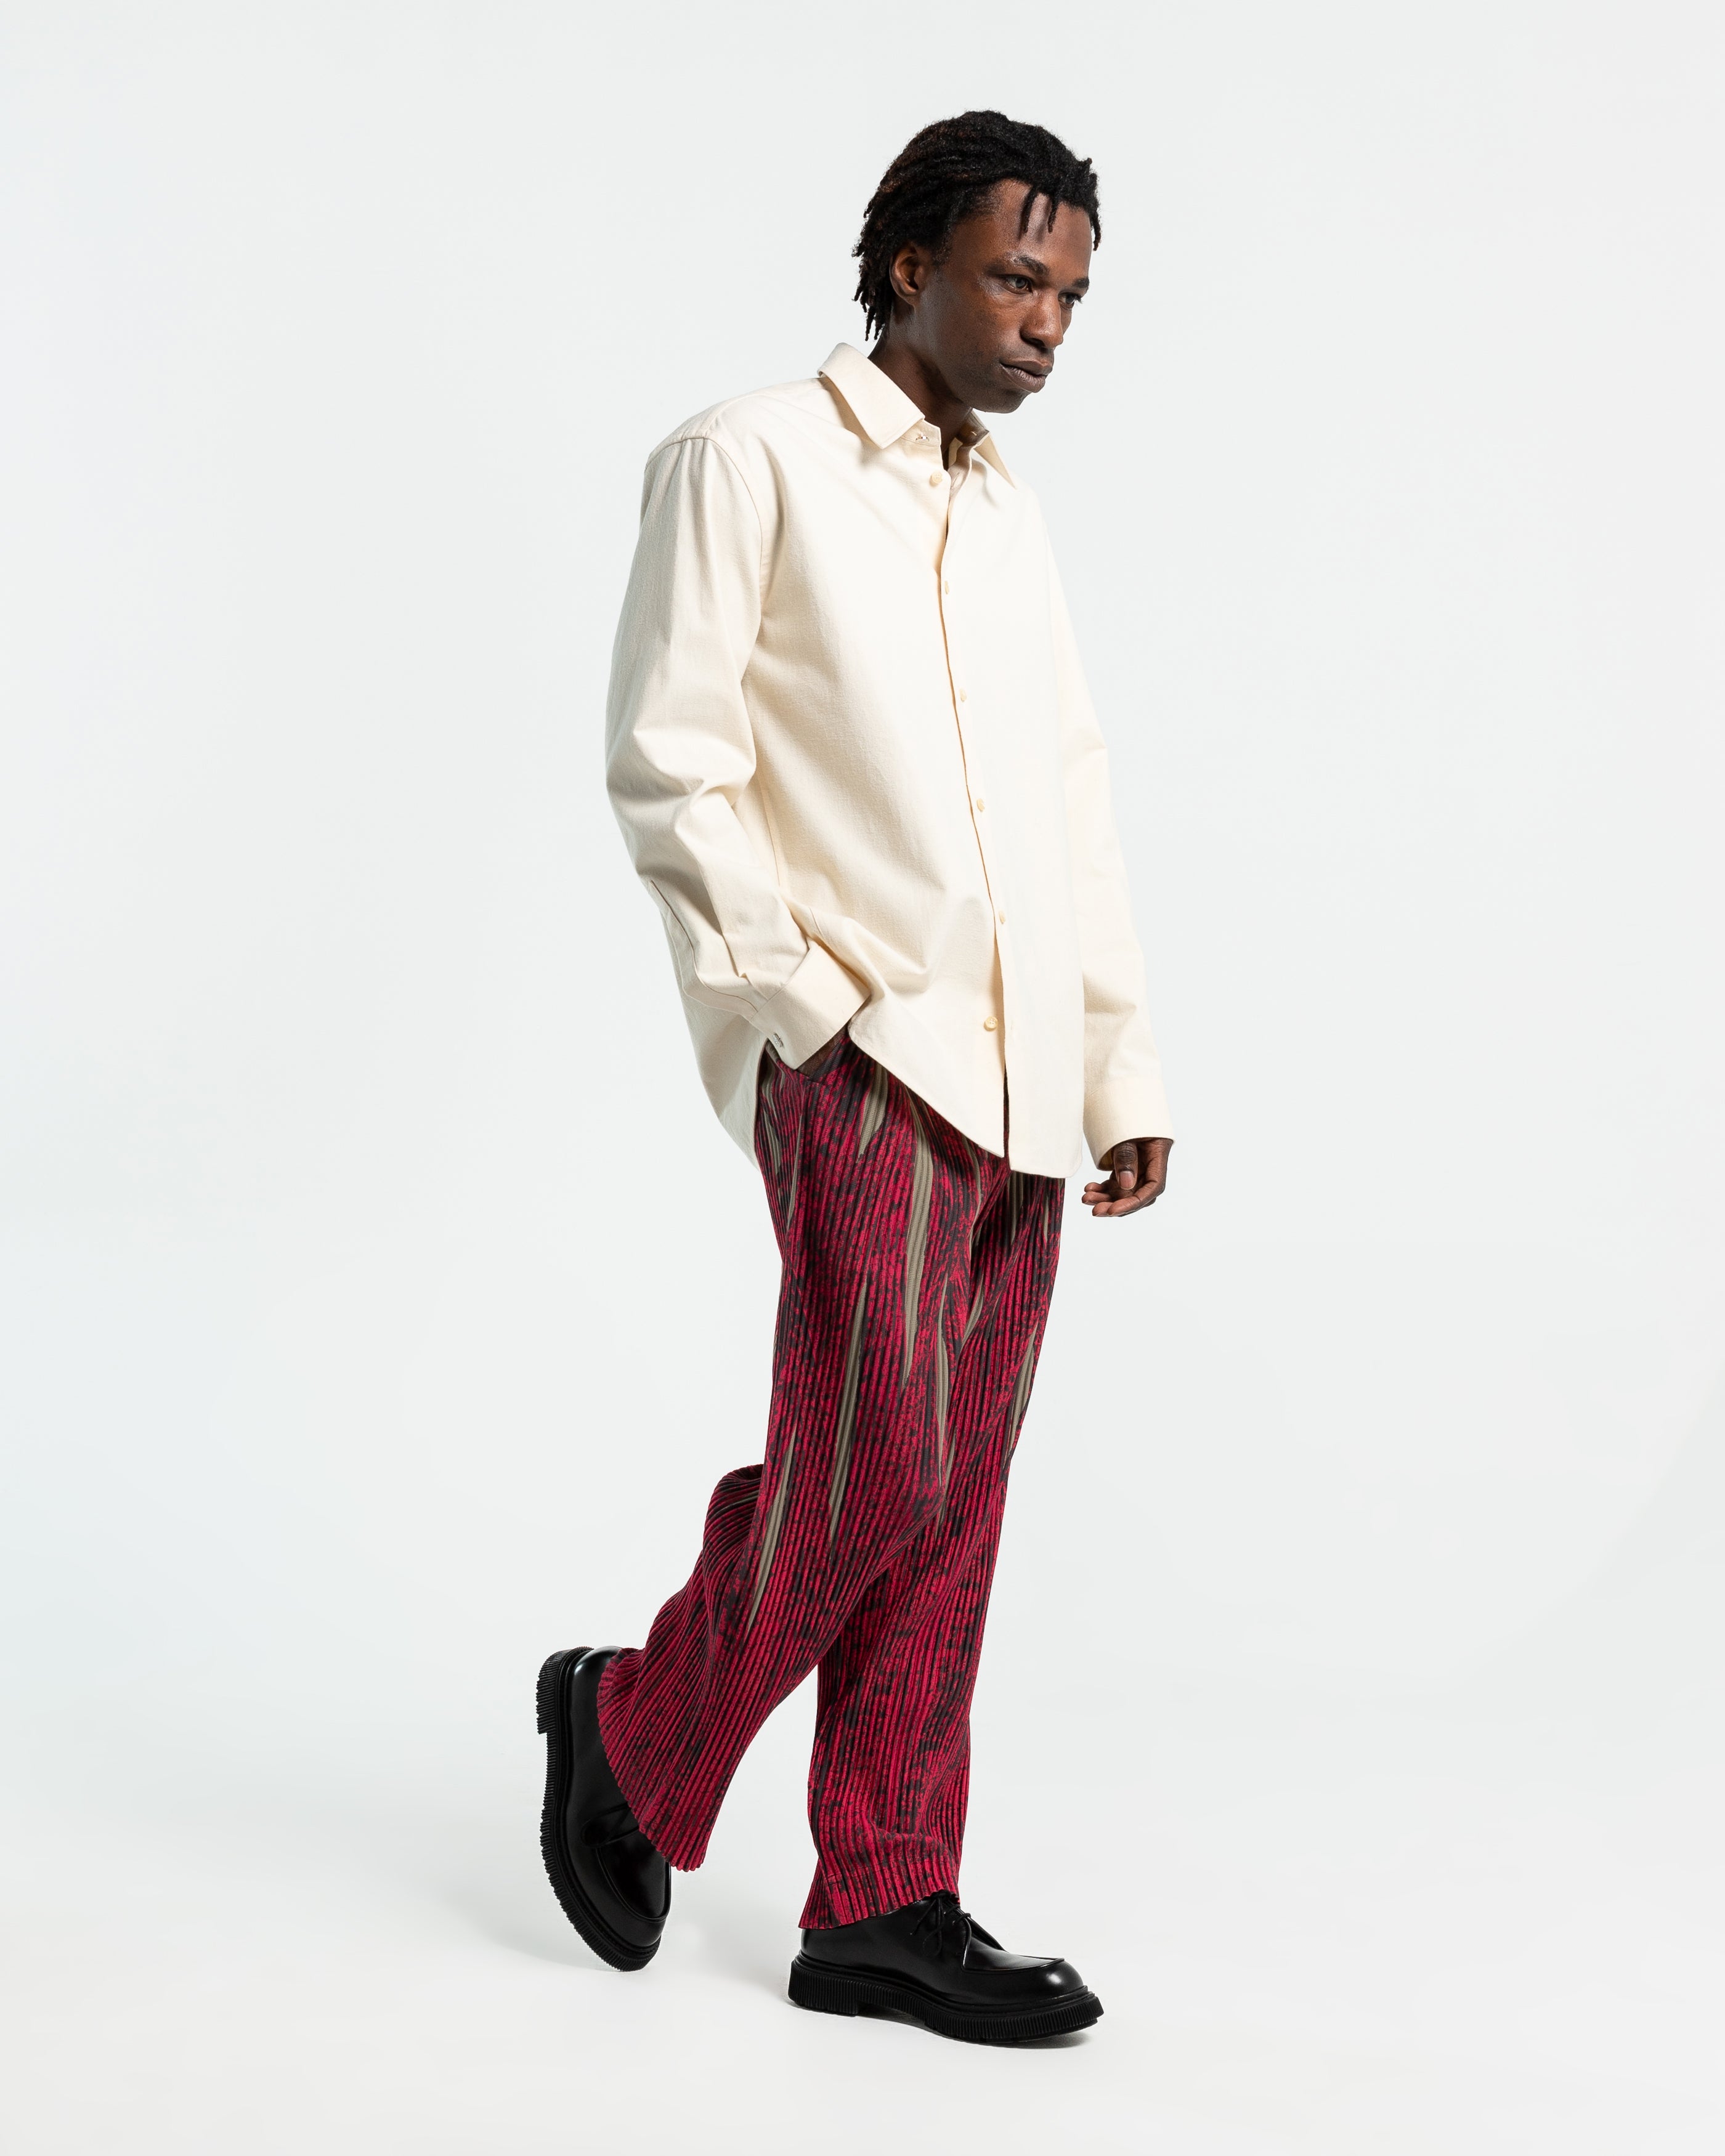 Grass Field Pants in Red